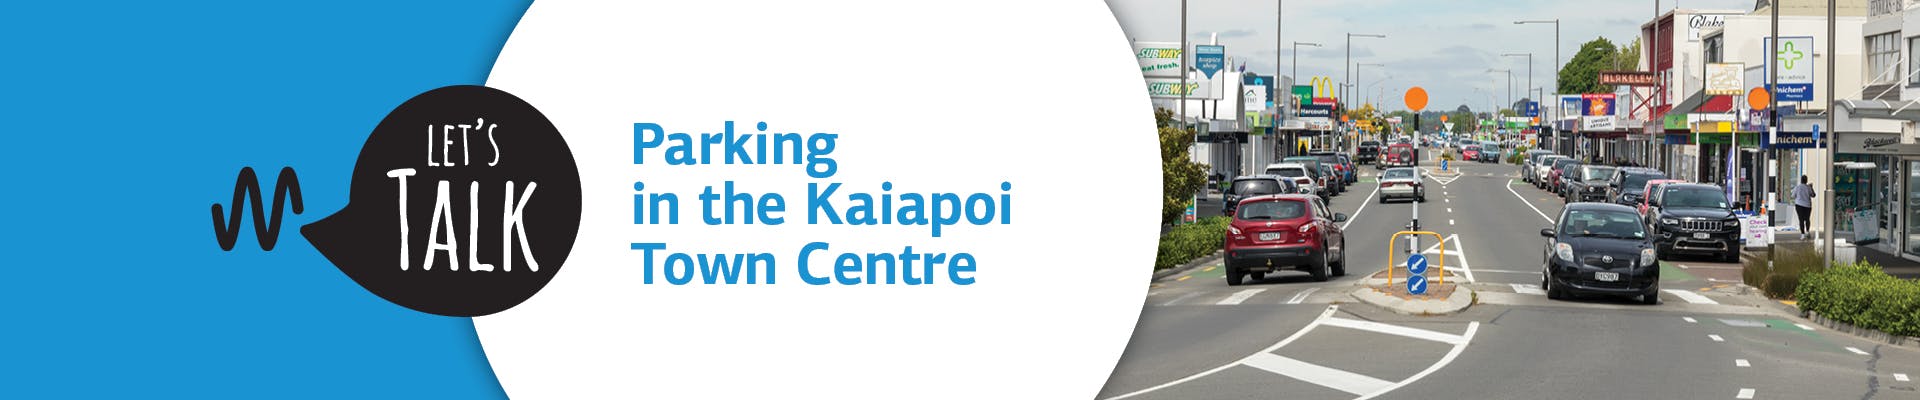 Let's Talk Parking in the Kaiapoi Town Centre